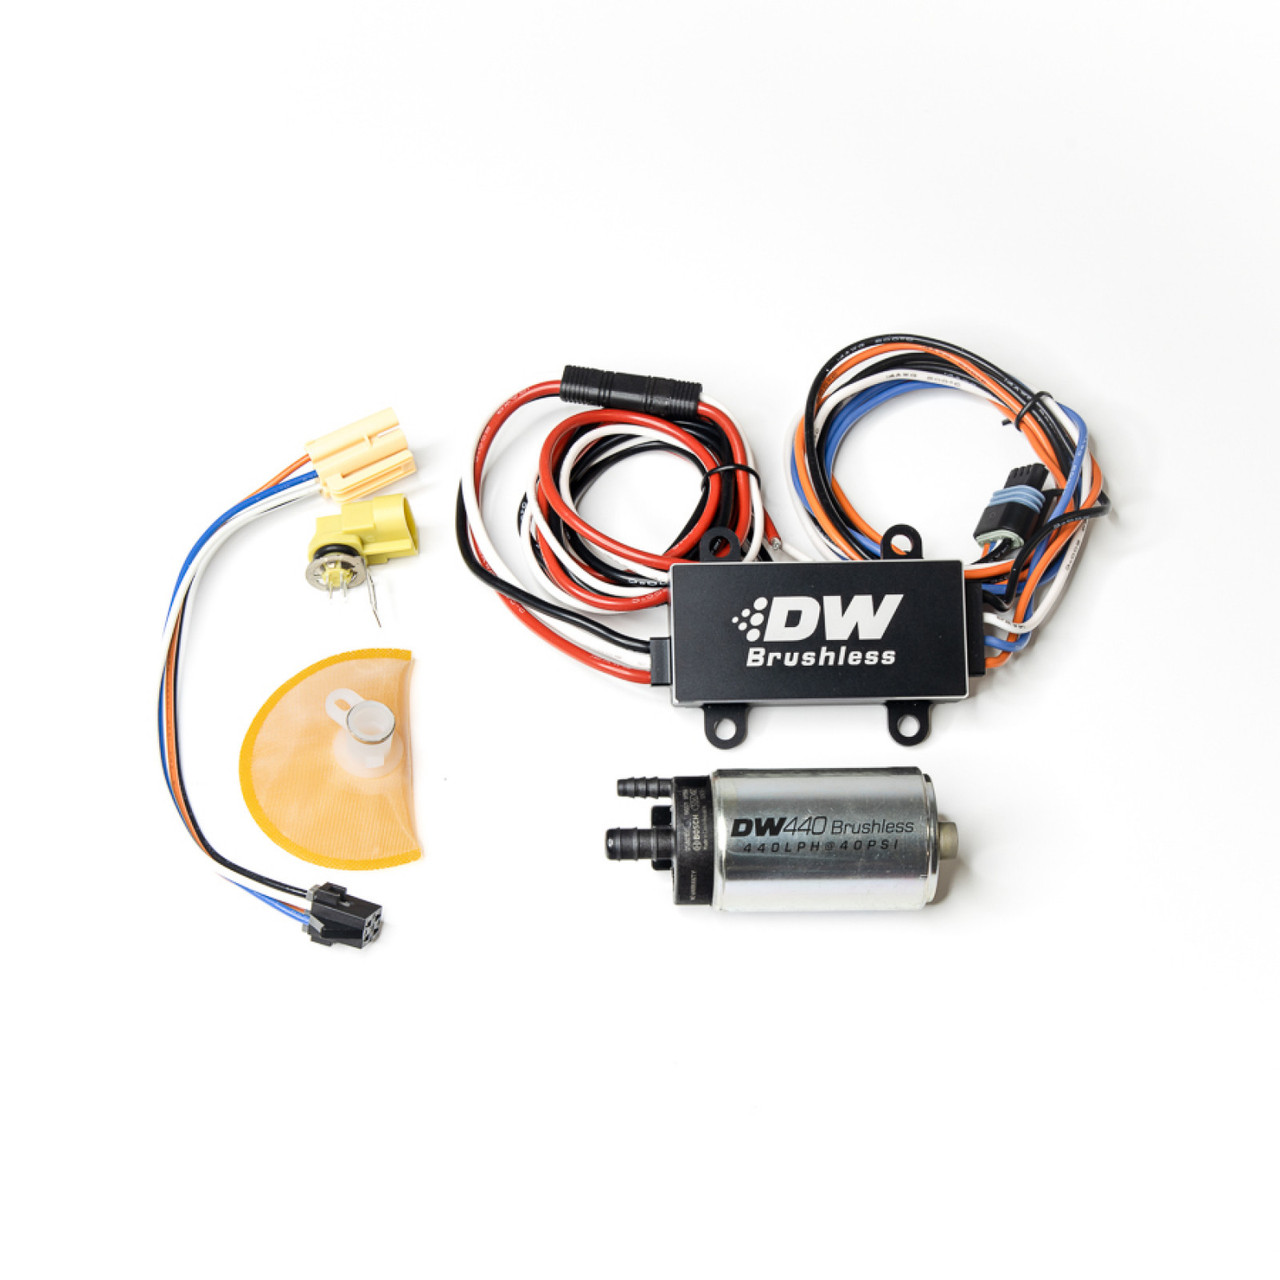 Deatschwerks 440lph In-Tank Brushless Fuel Pump with PWM Controller & 9-0908 Install Kit (DEW-9-441-C103-0908)